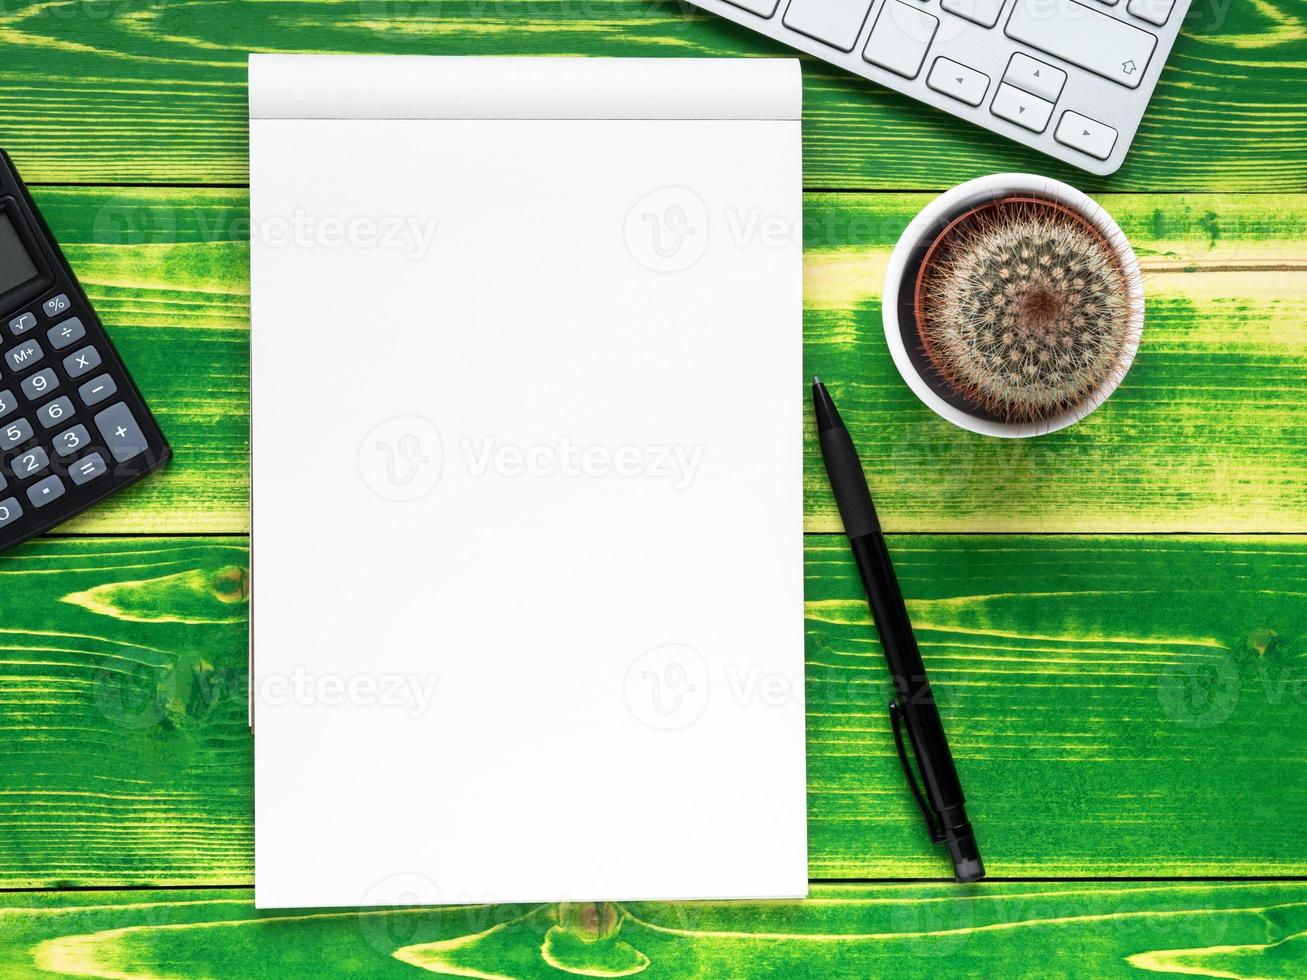 open notebook with white page, pen, calculator, computer keyboard, cactus photo